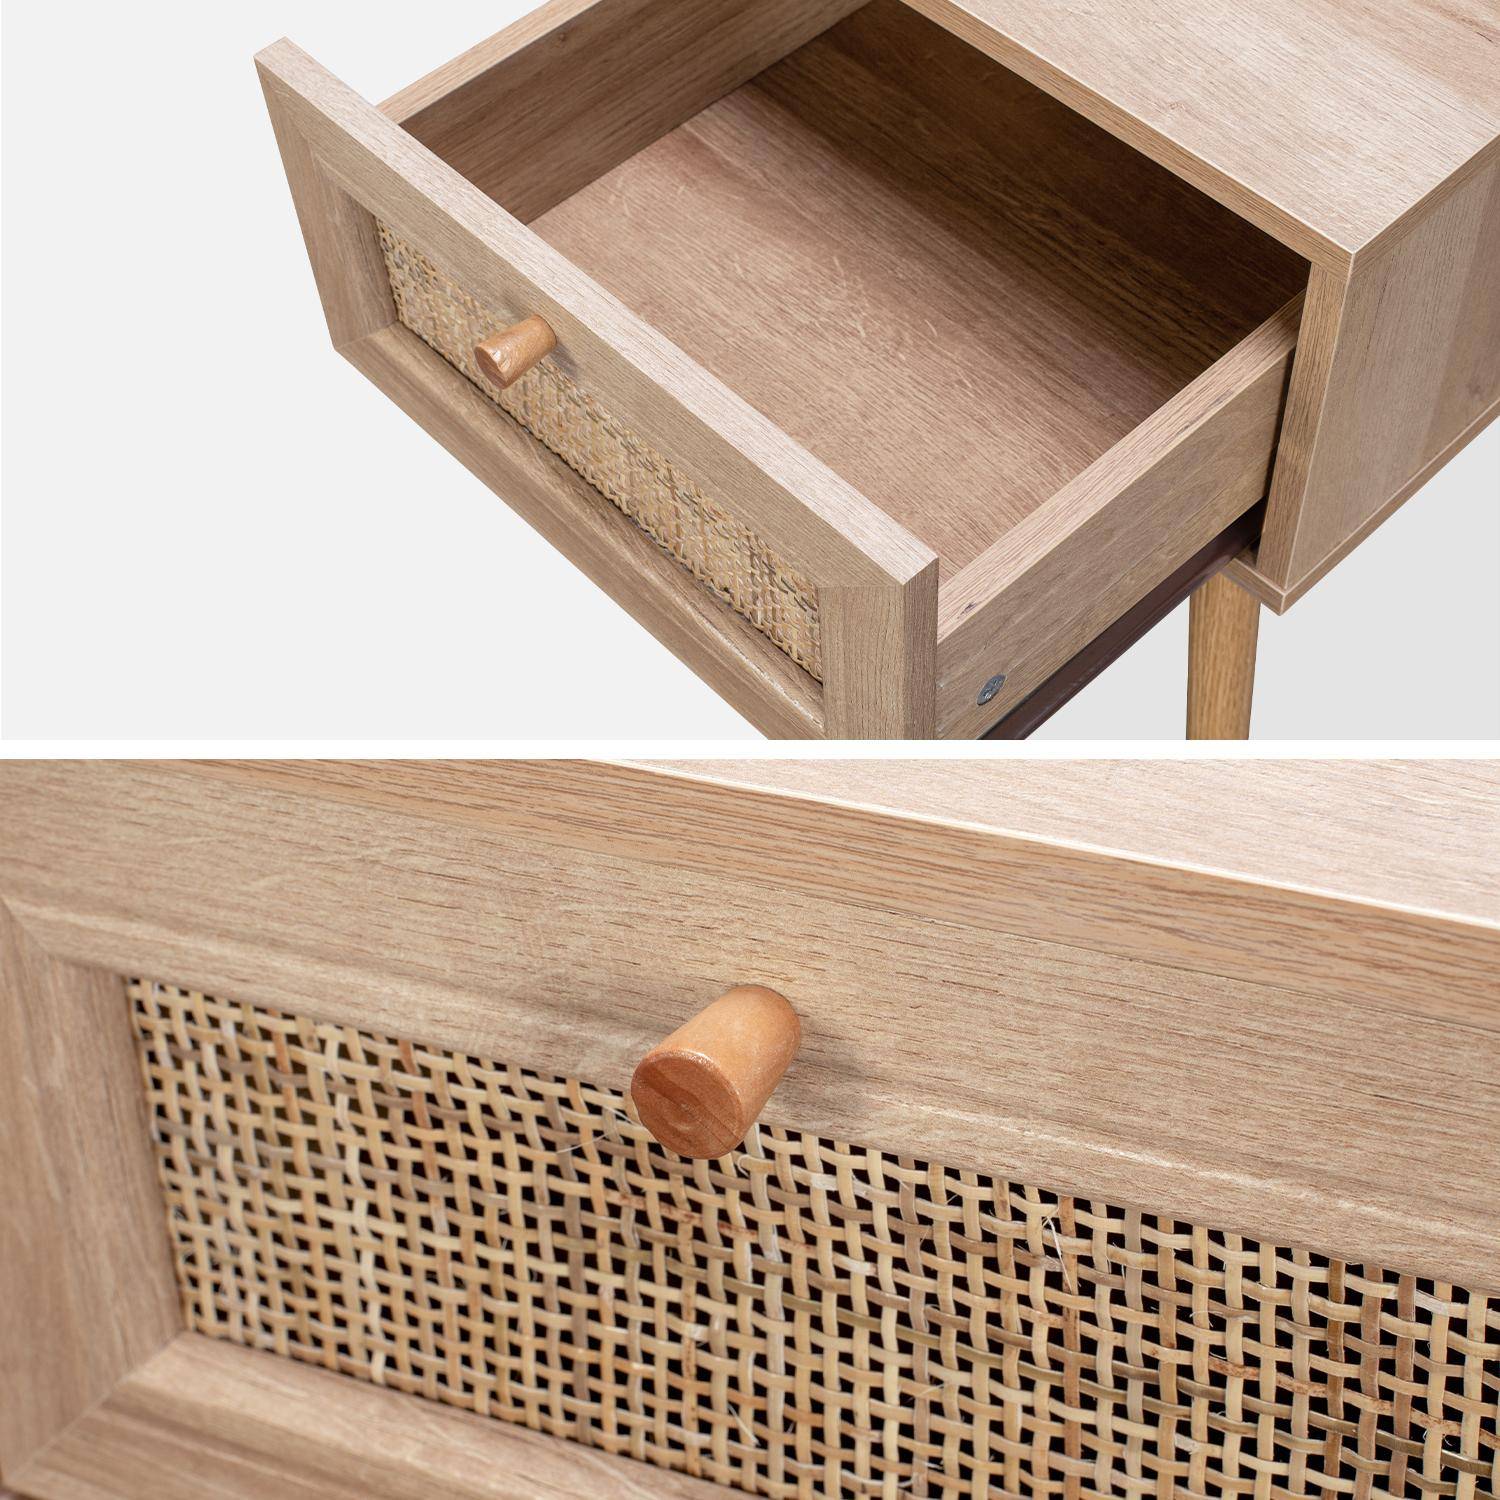 Woven rattan bedside table with drawer, 39x39x55.4cm - Boheme - Natural Wood colour,sweeek,Photo7